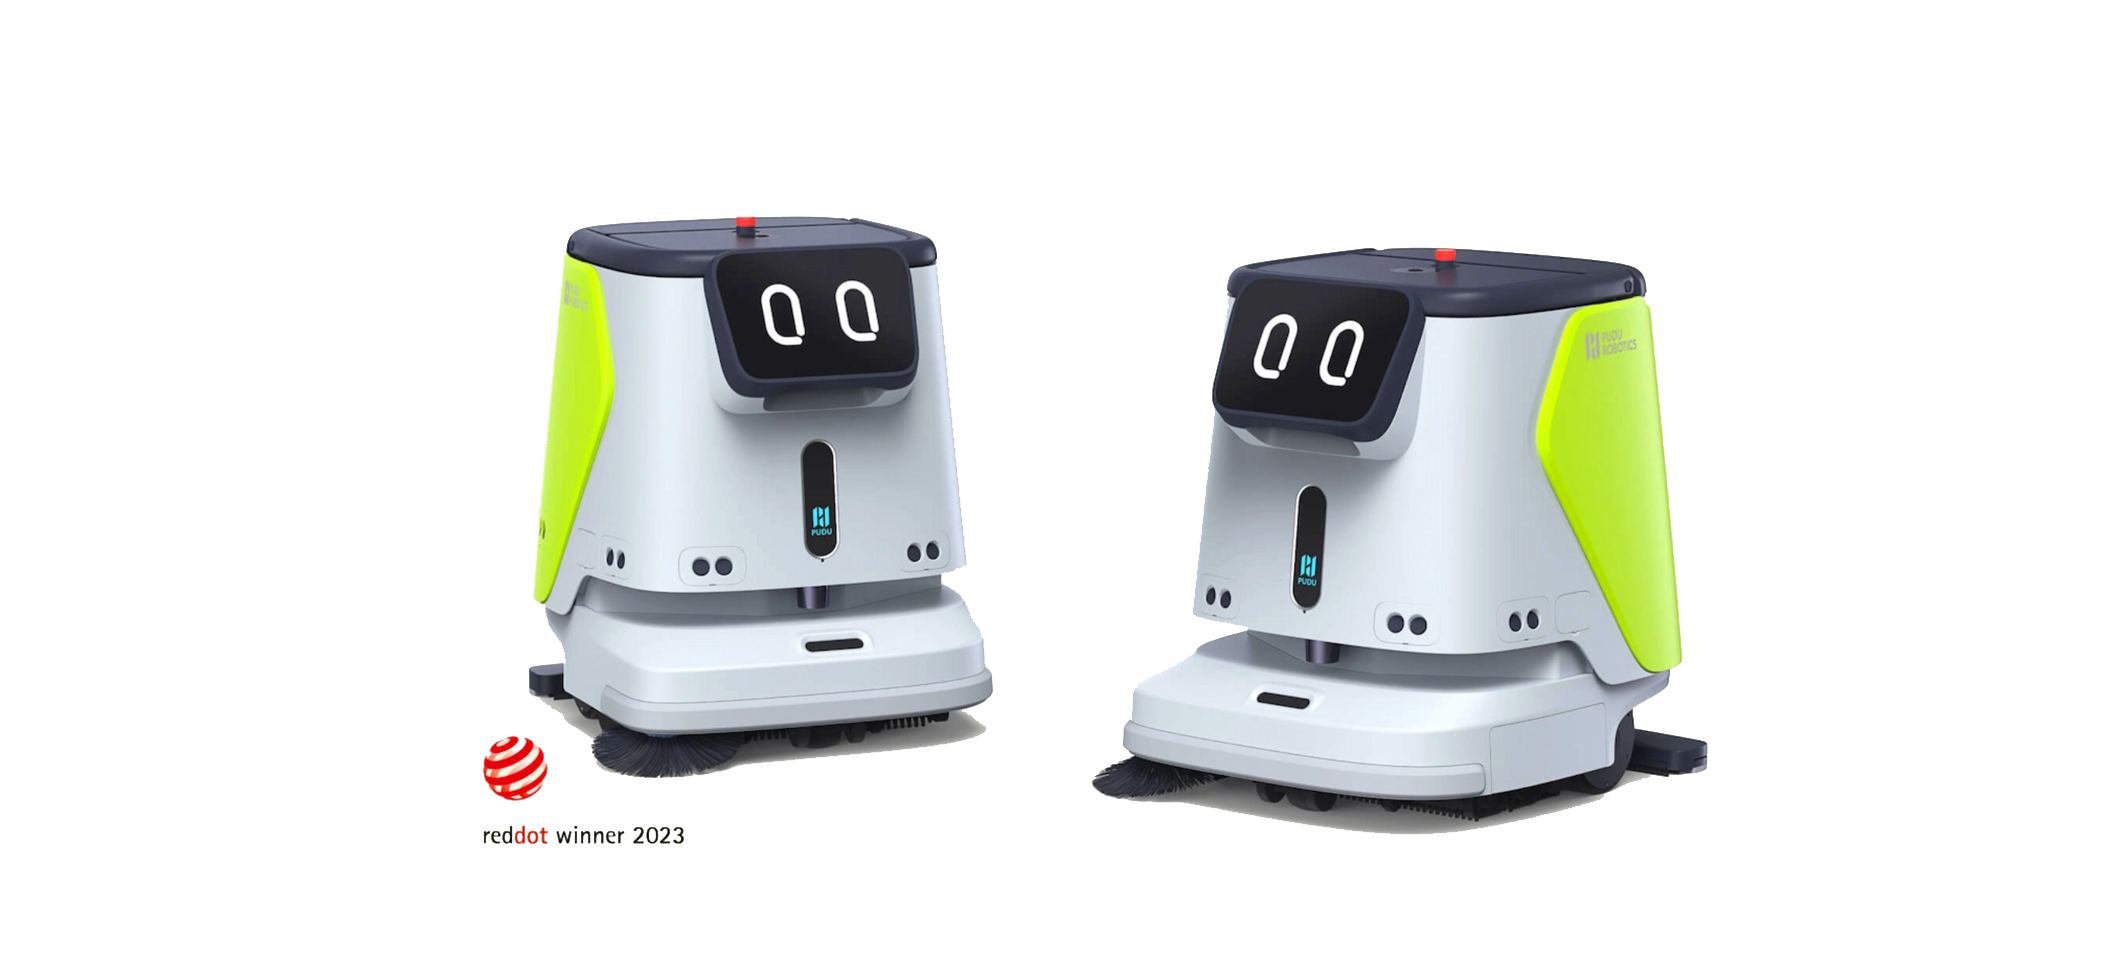 images/pudu-trans222.webp - PUDU commercial cleaning robot from MetaDolce Technology